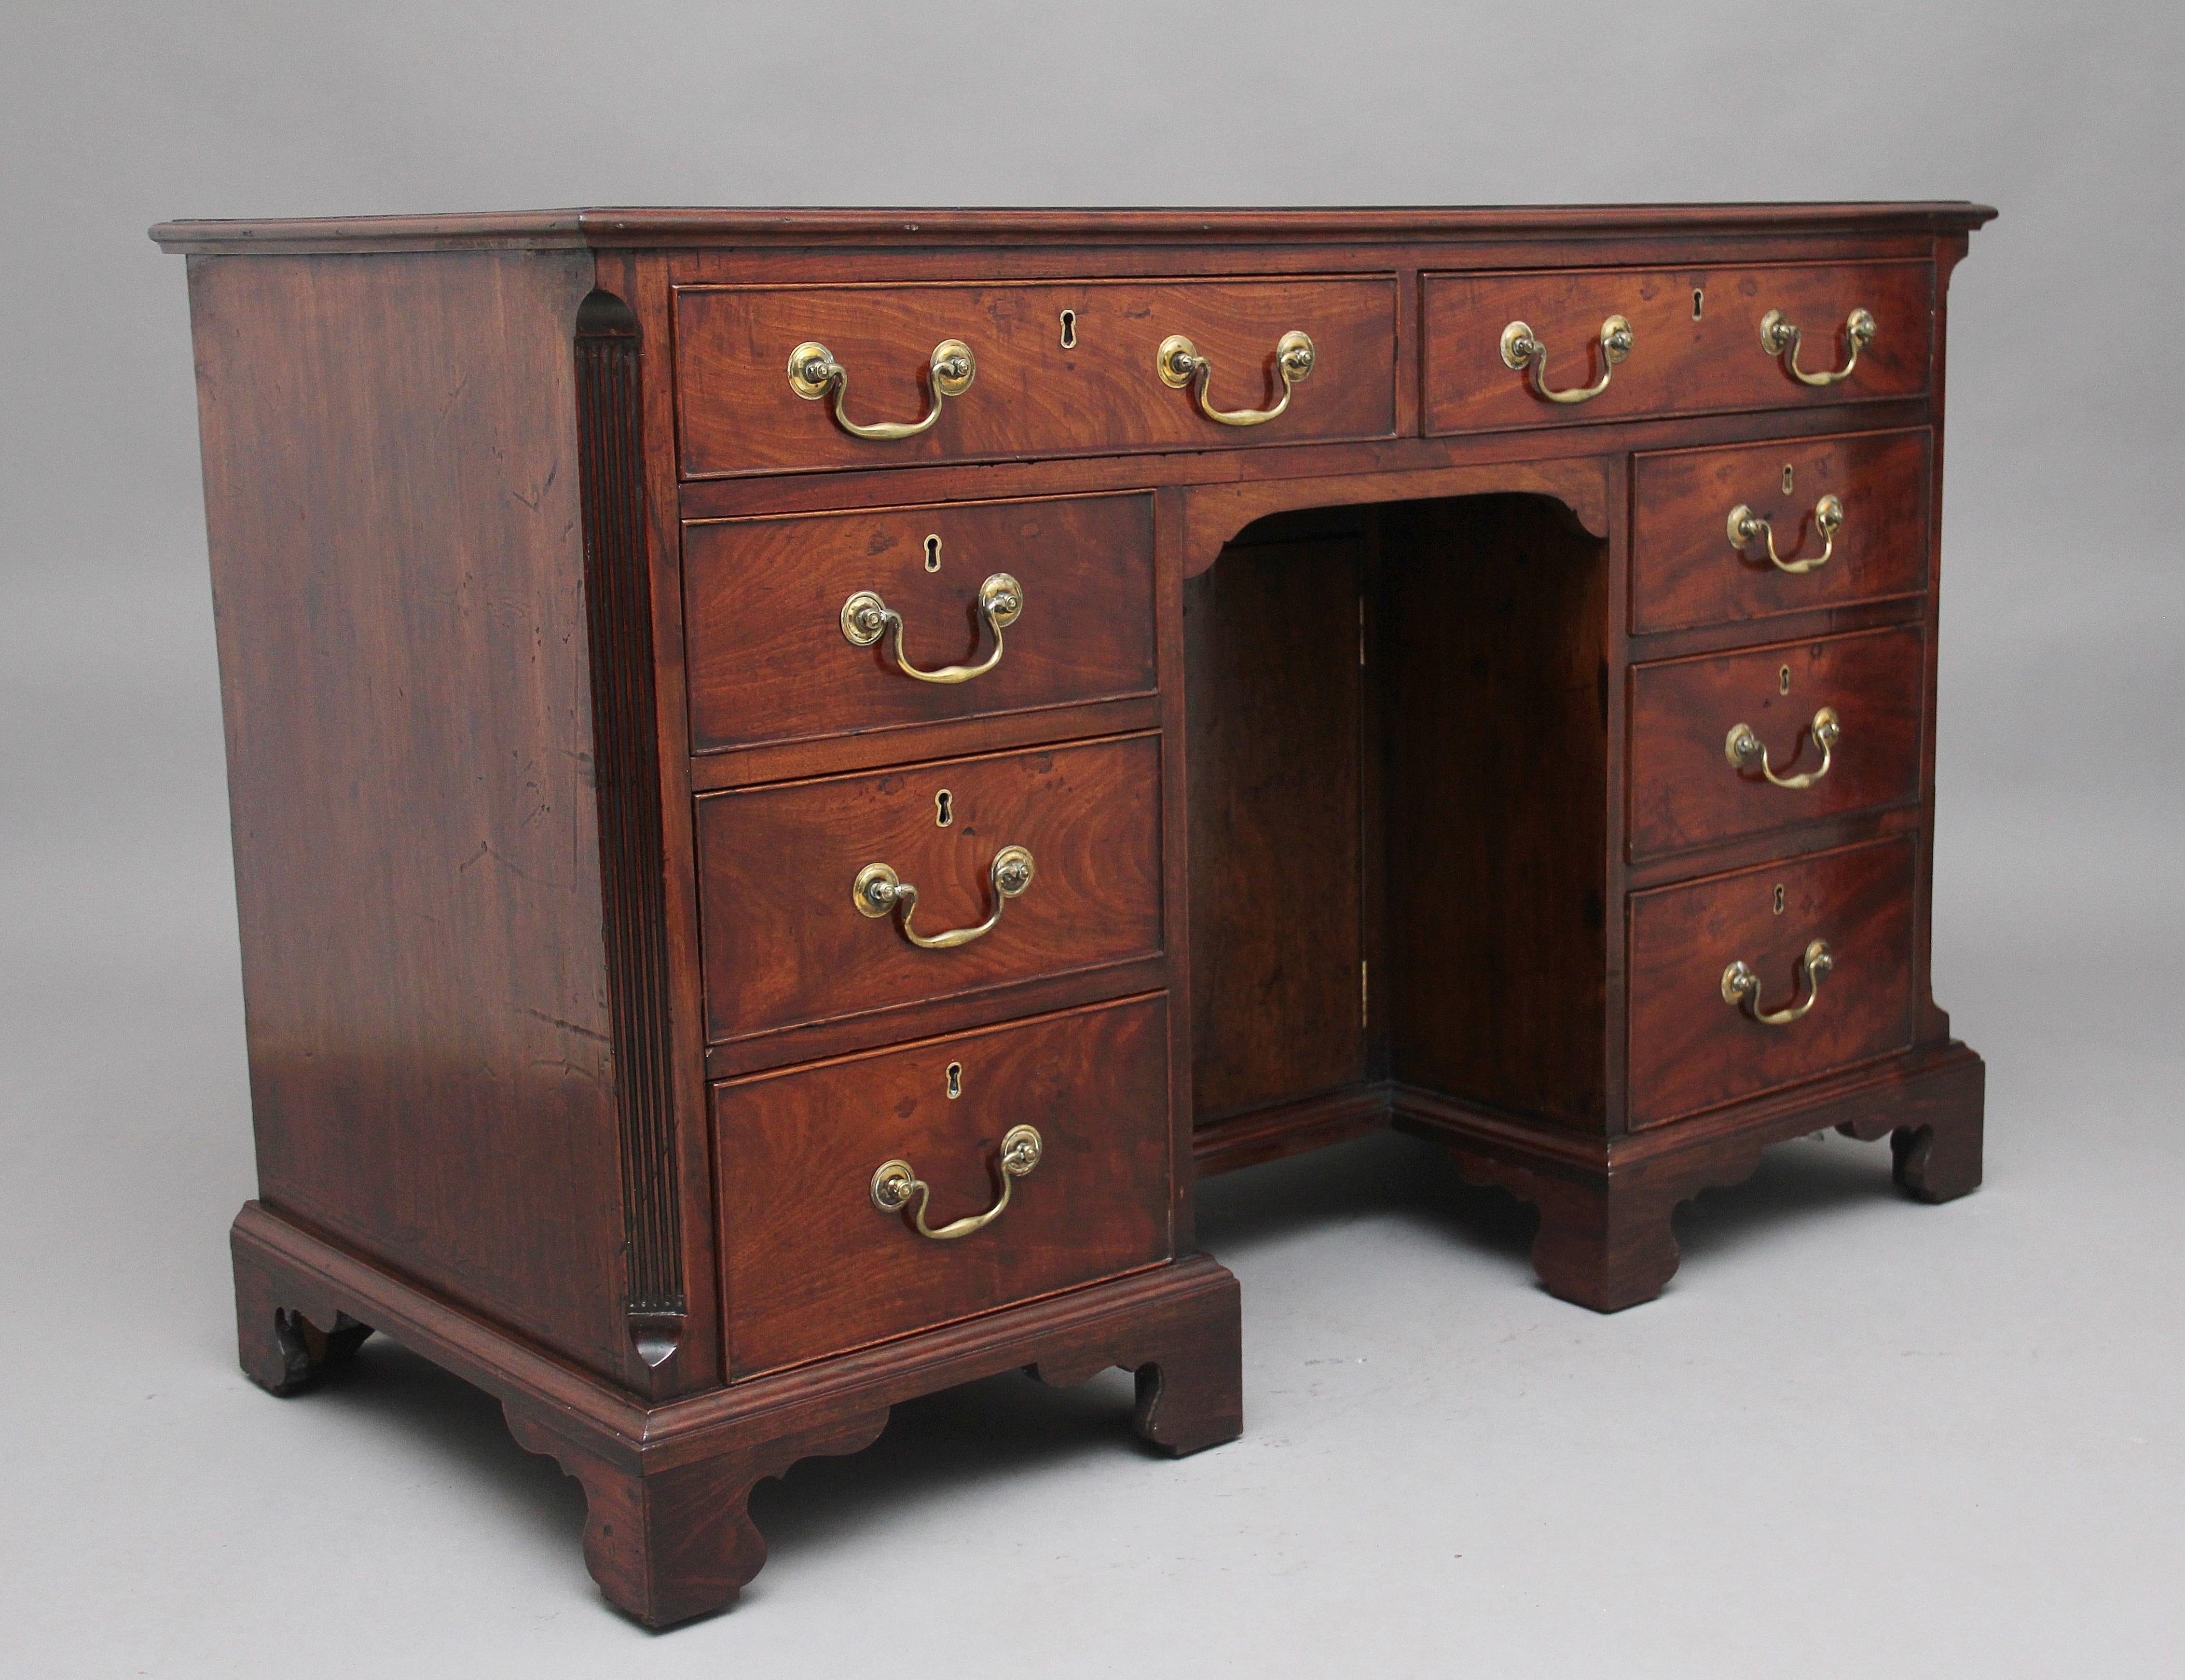 18th Century Mahogany Kneehole Desk In Good Condition For Sale In Martlesham, GB